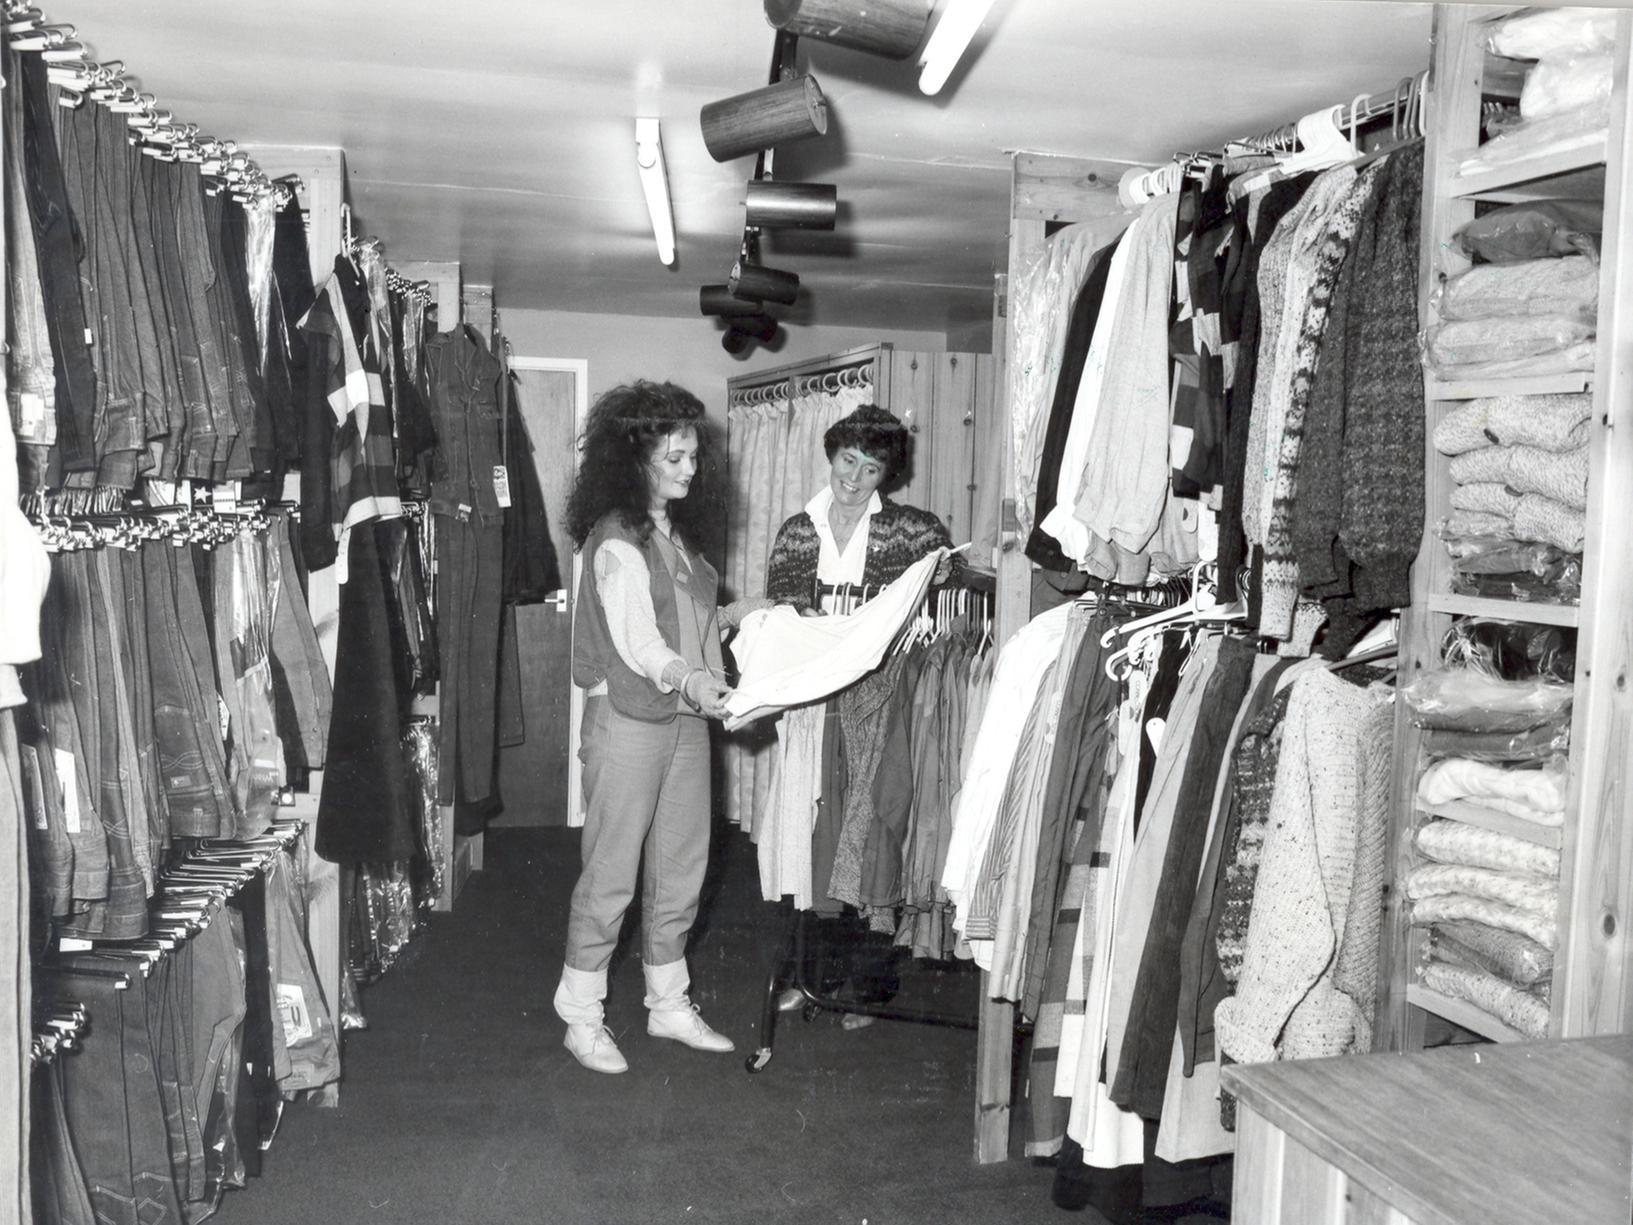 Fashionistas in Horsforth were shopping at Pants Corner in the early 1980s.